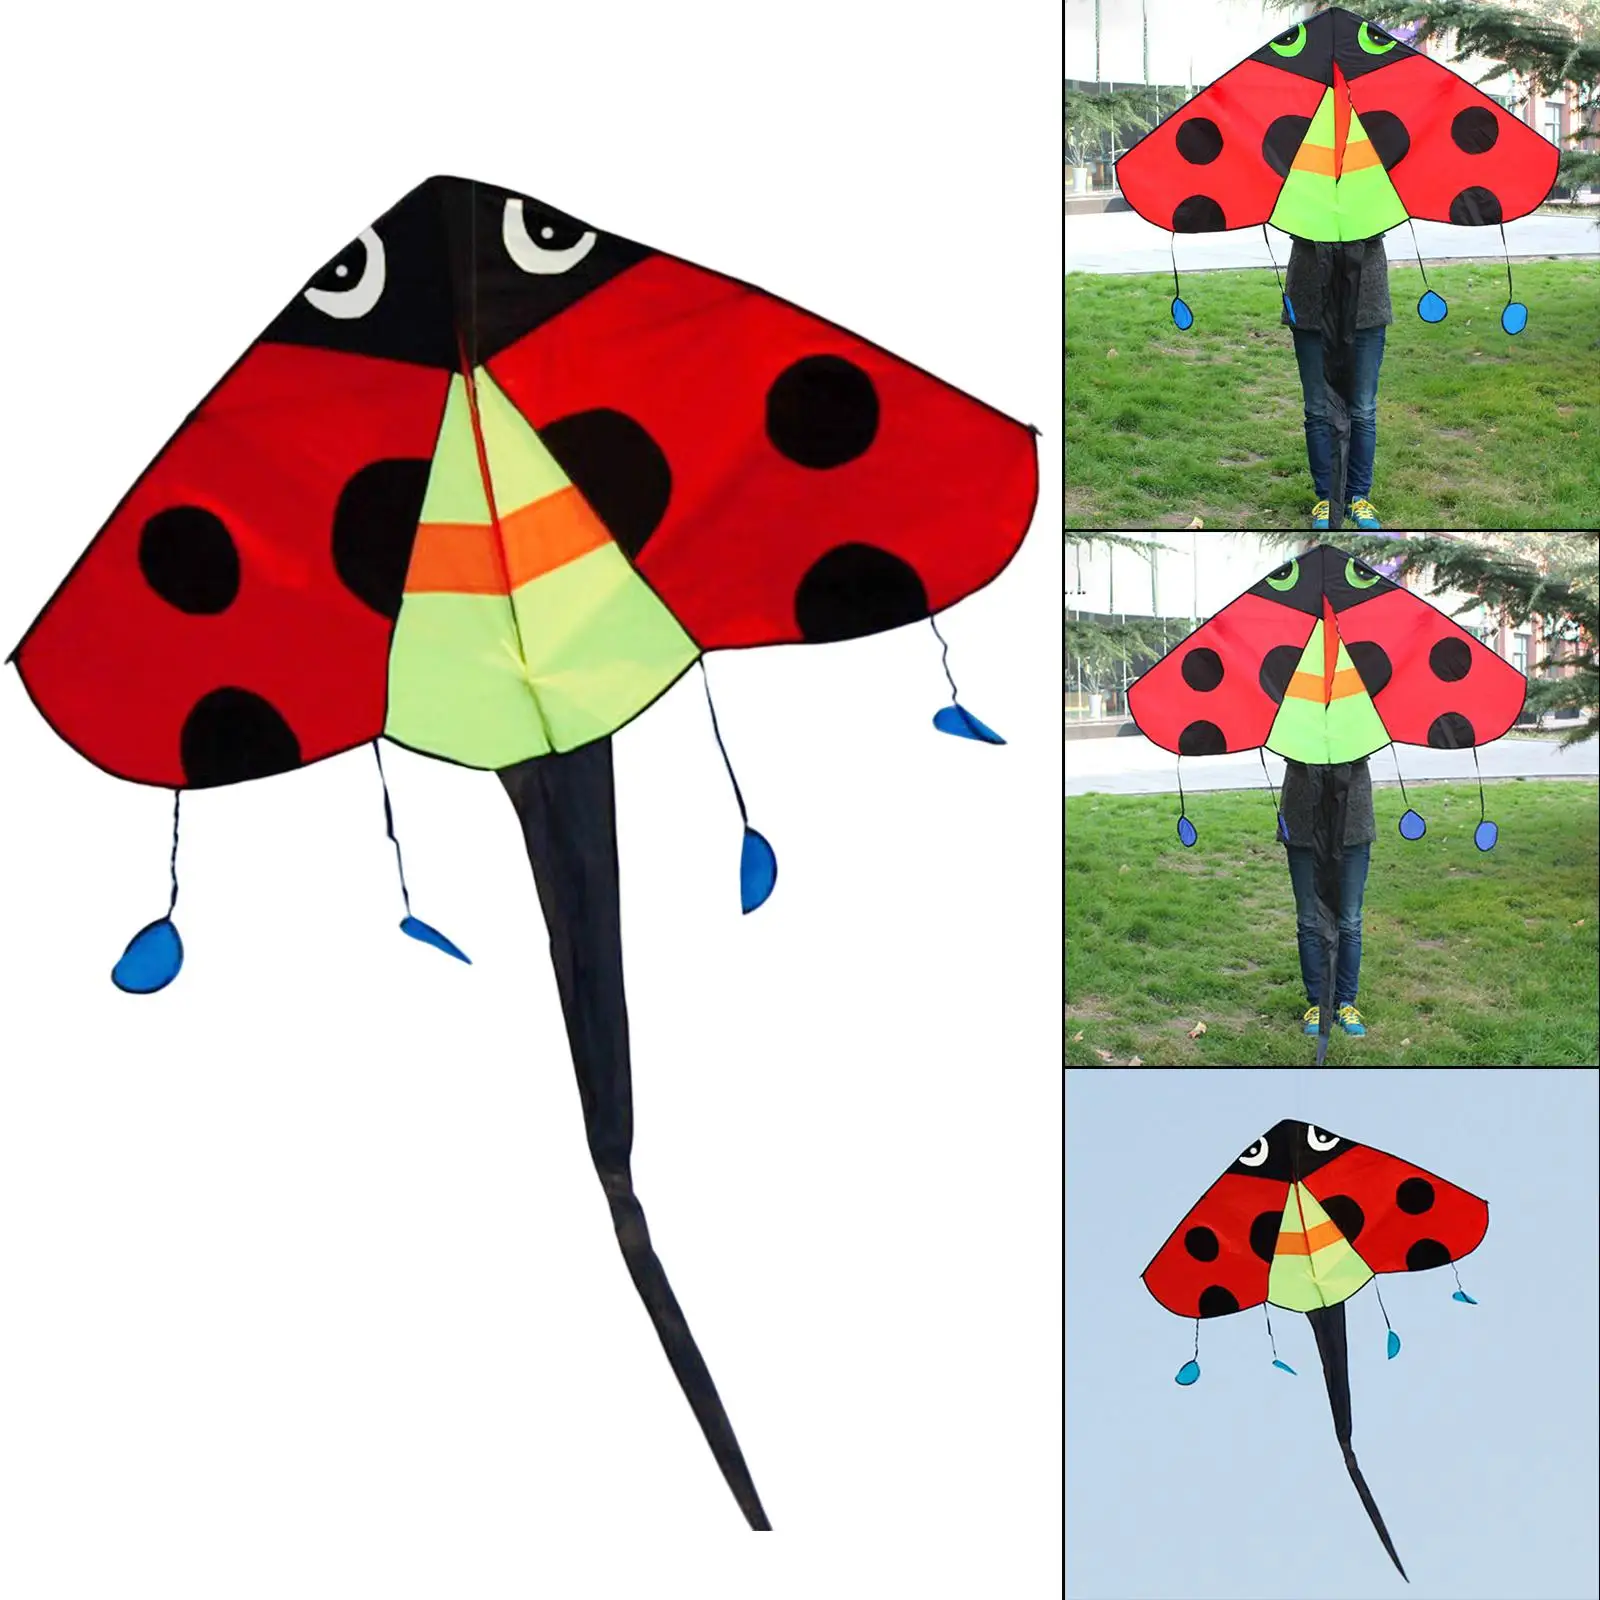 Large Delta  Kite Huge  Triangle Kite Single Line Easy  with String  for Garden Sports Games Kids Adults